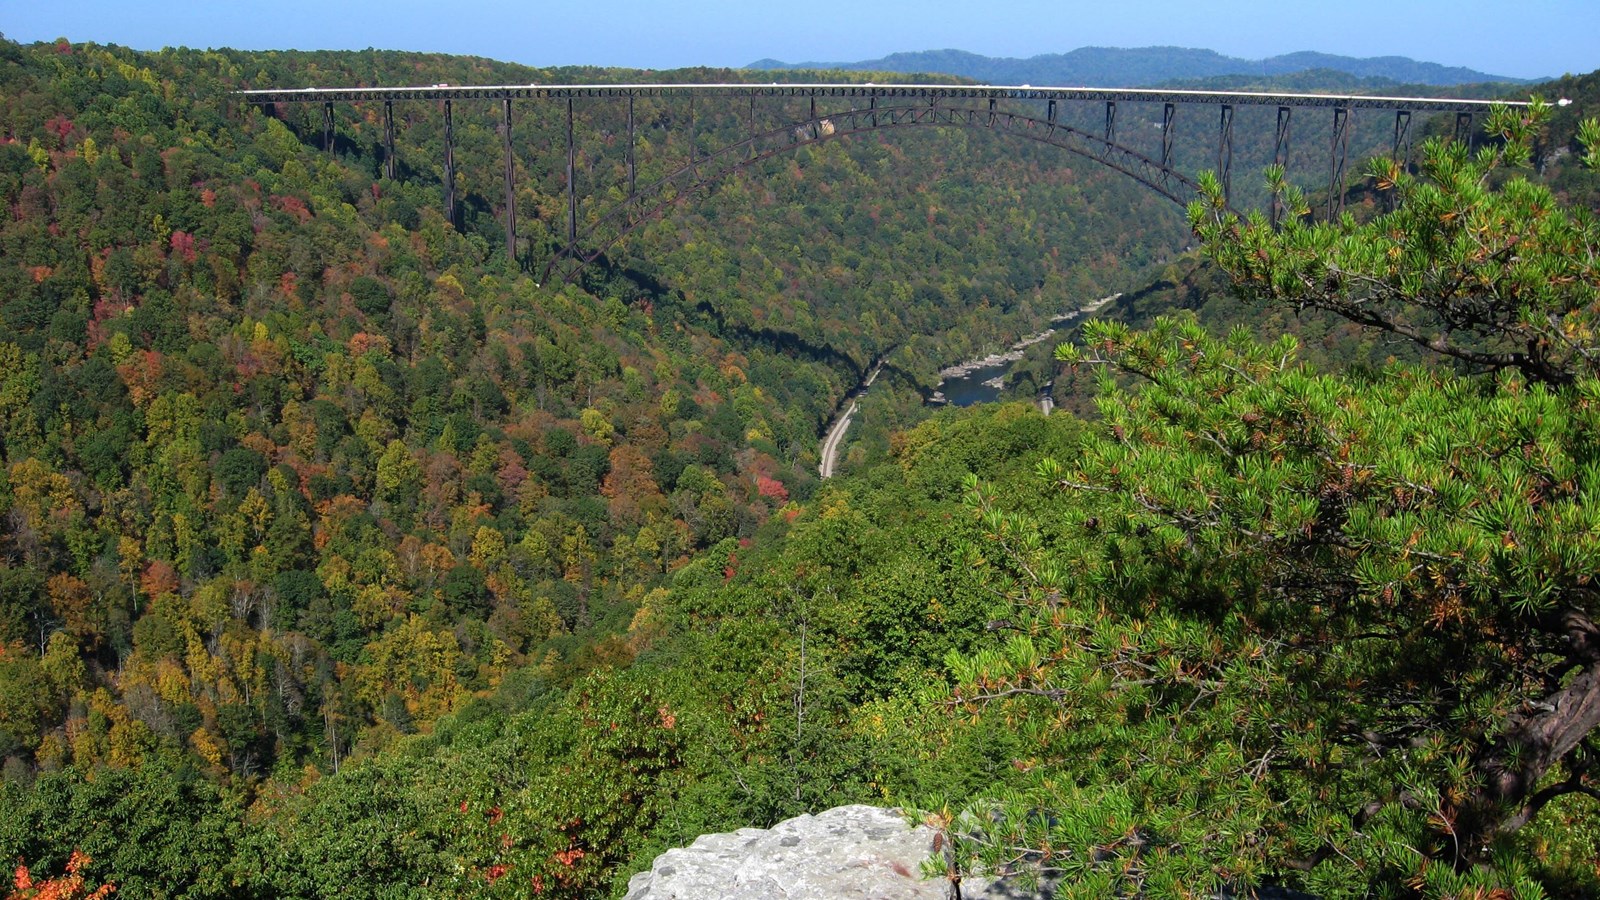 A view of the New River Gorge Bridge spanning river and deep gorge